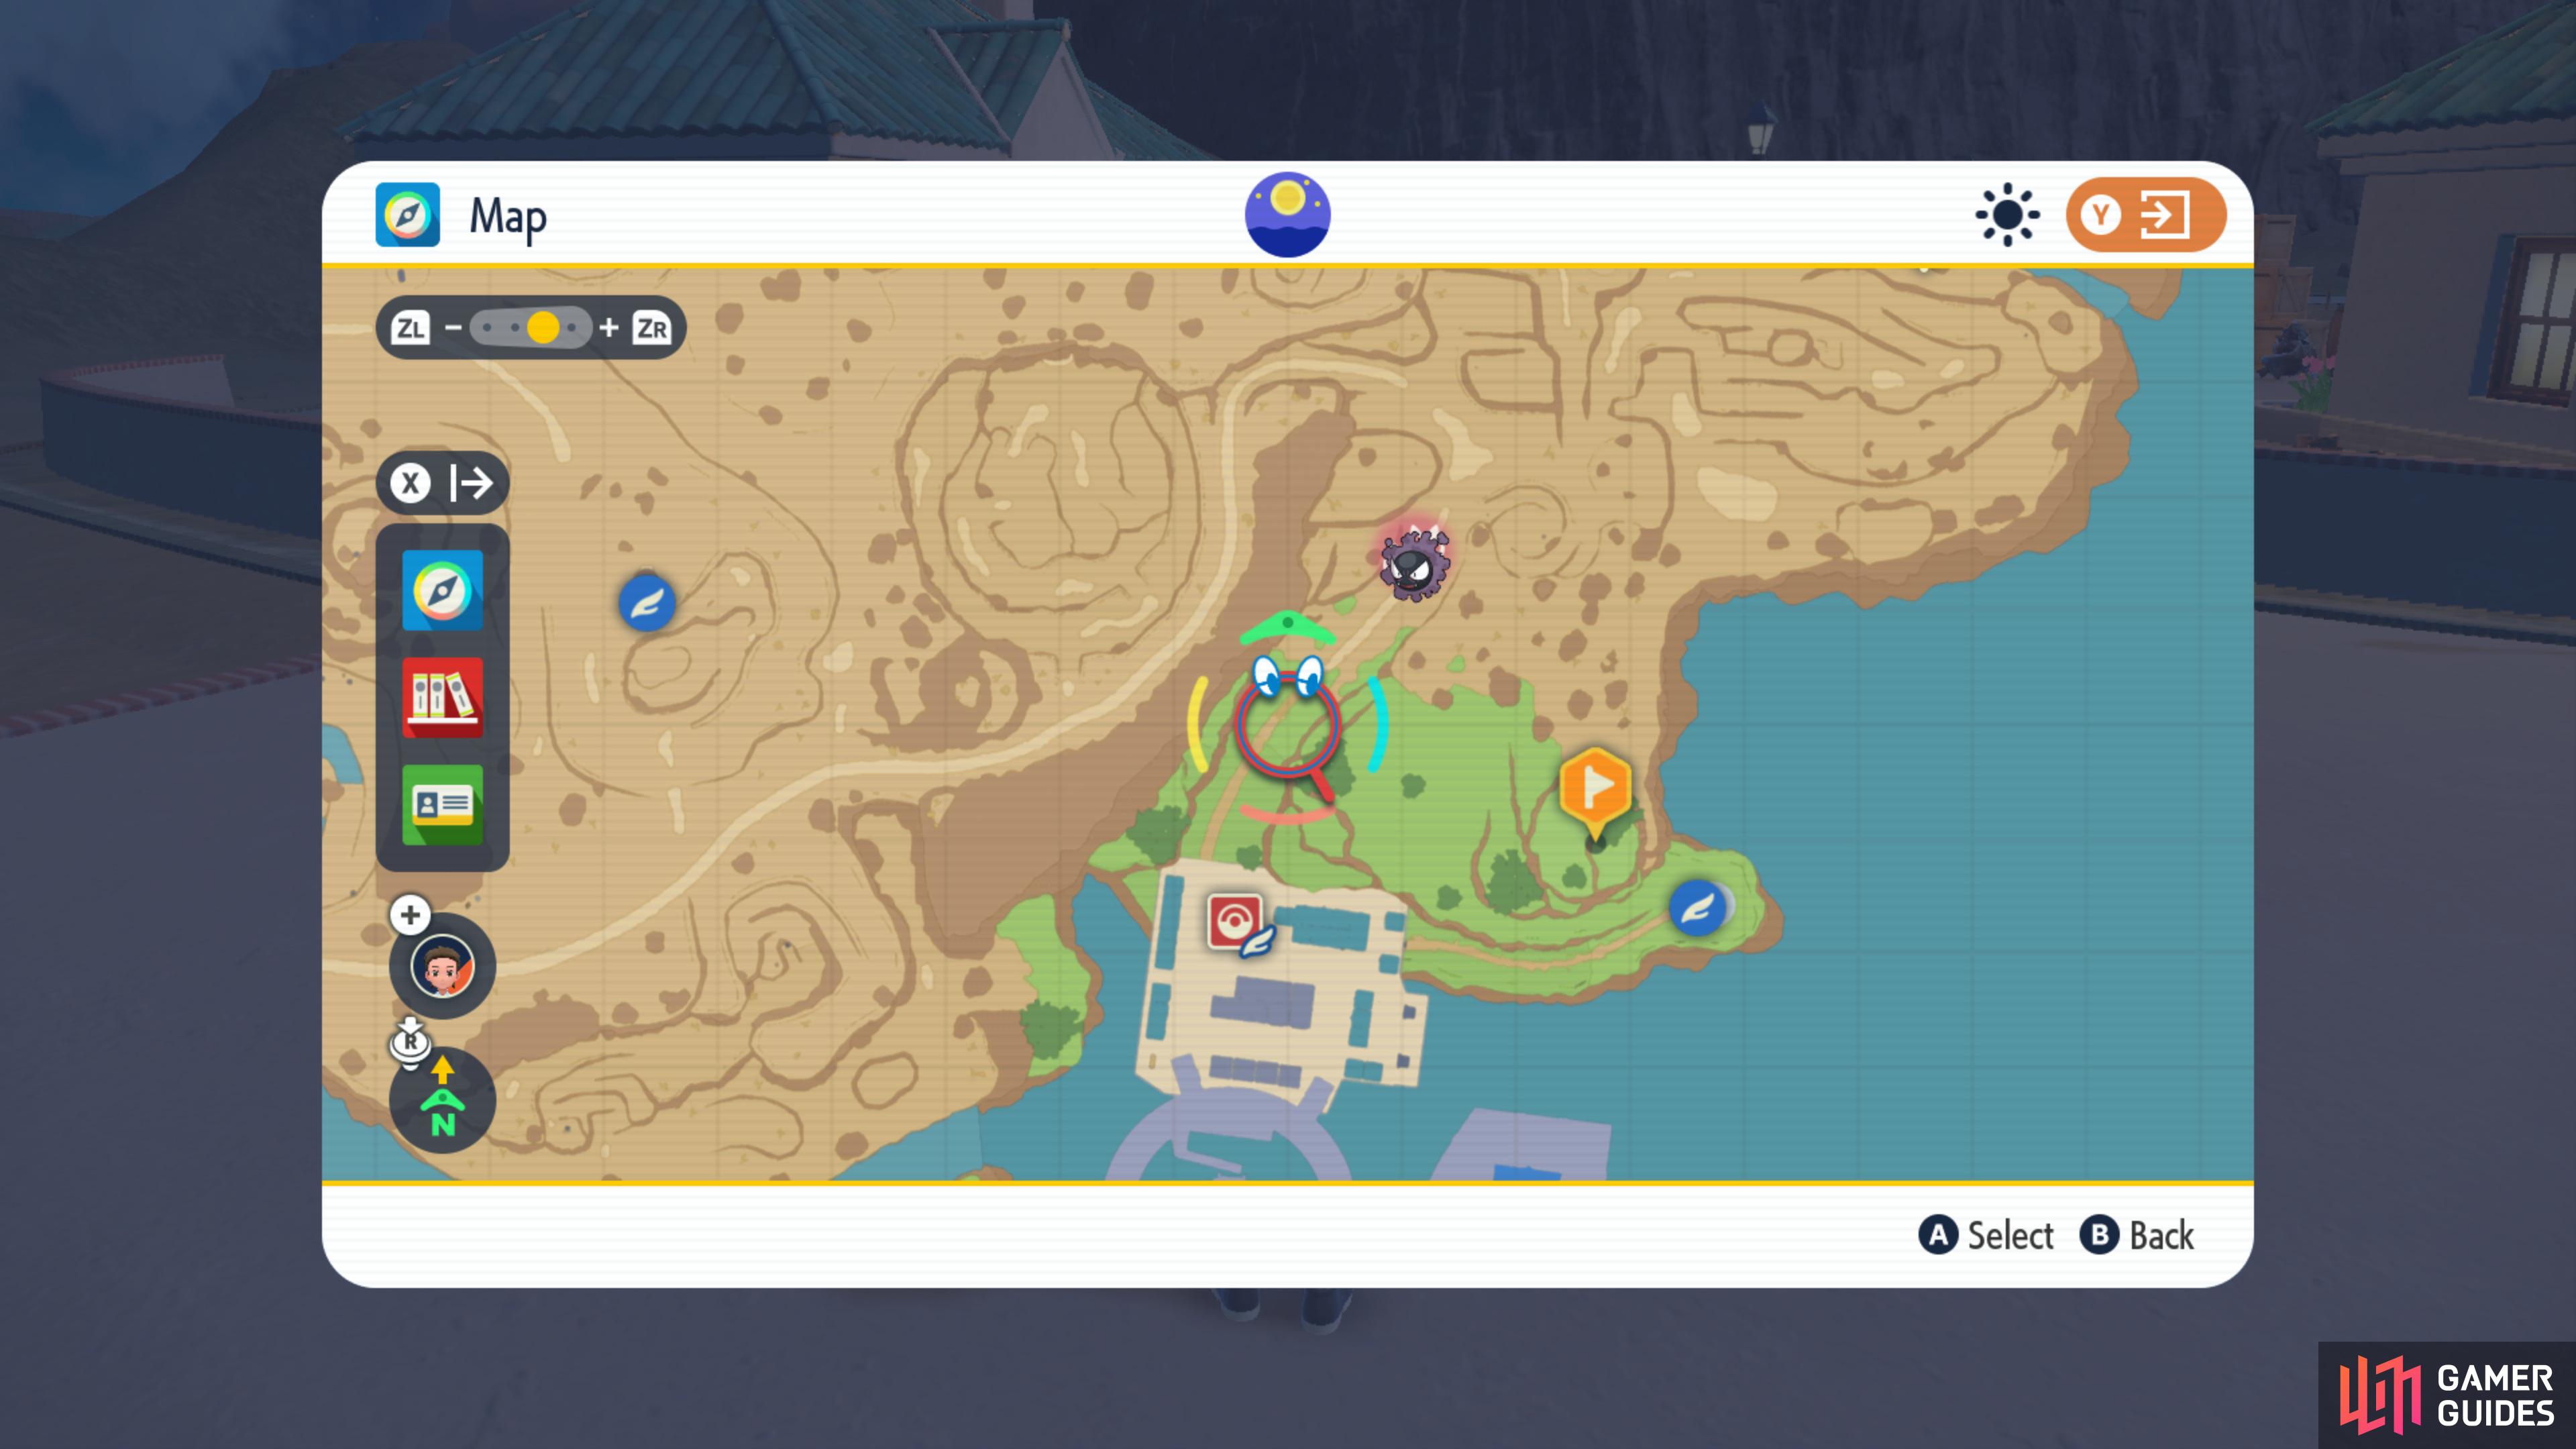 Head to the first flag icon on the map